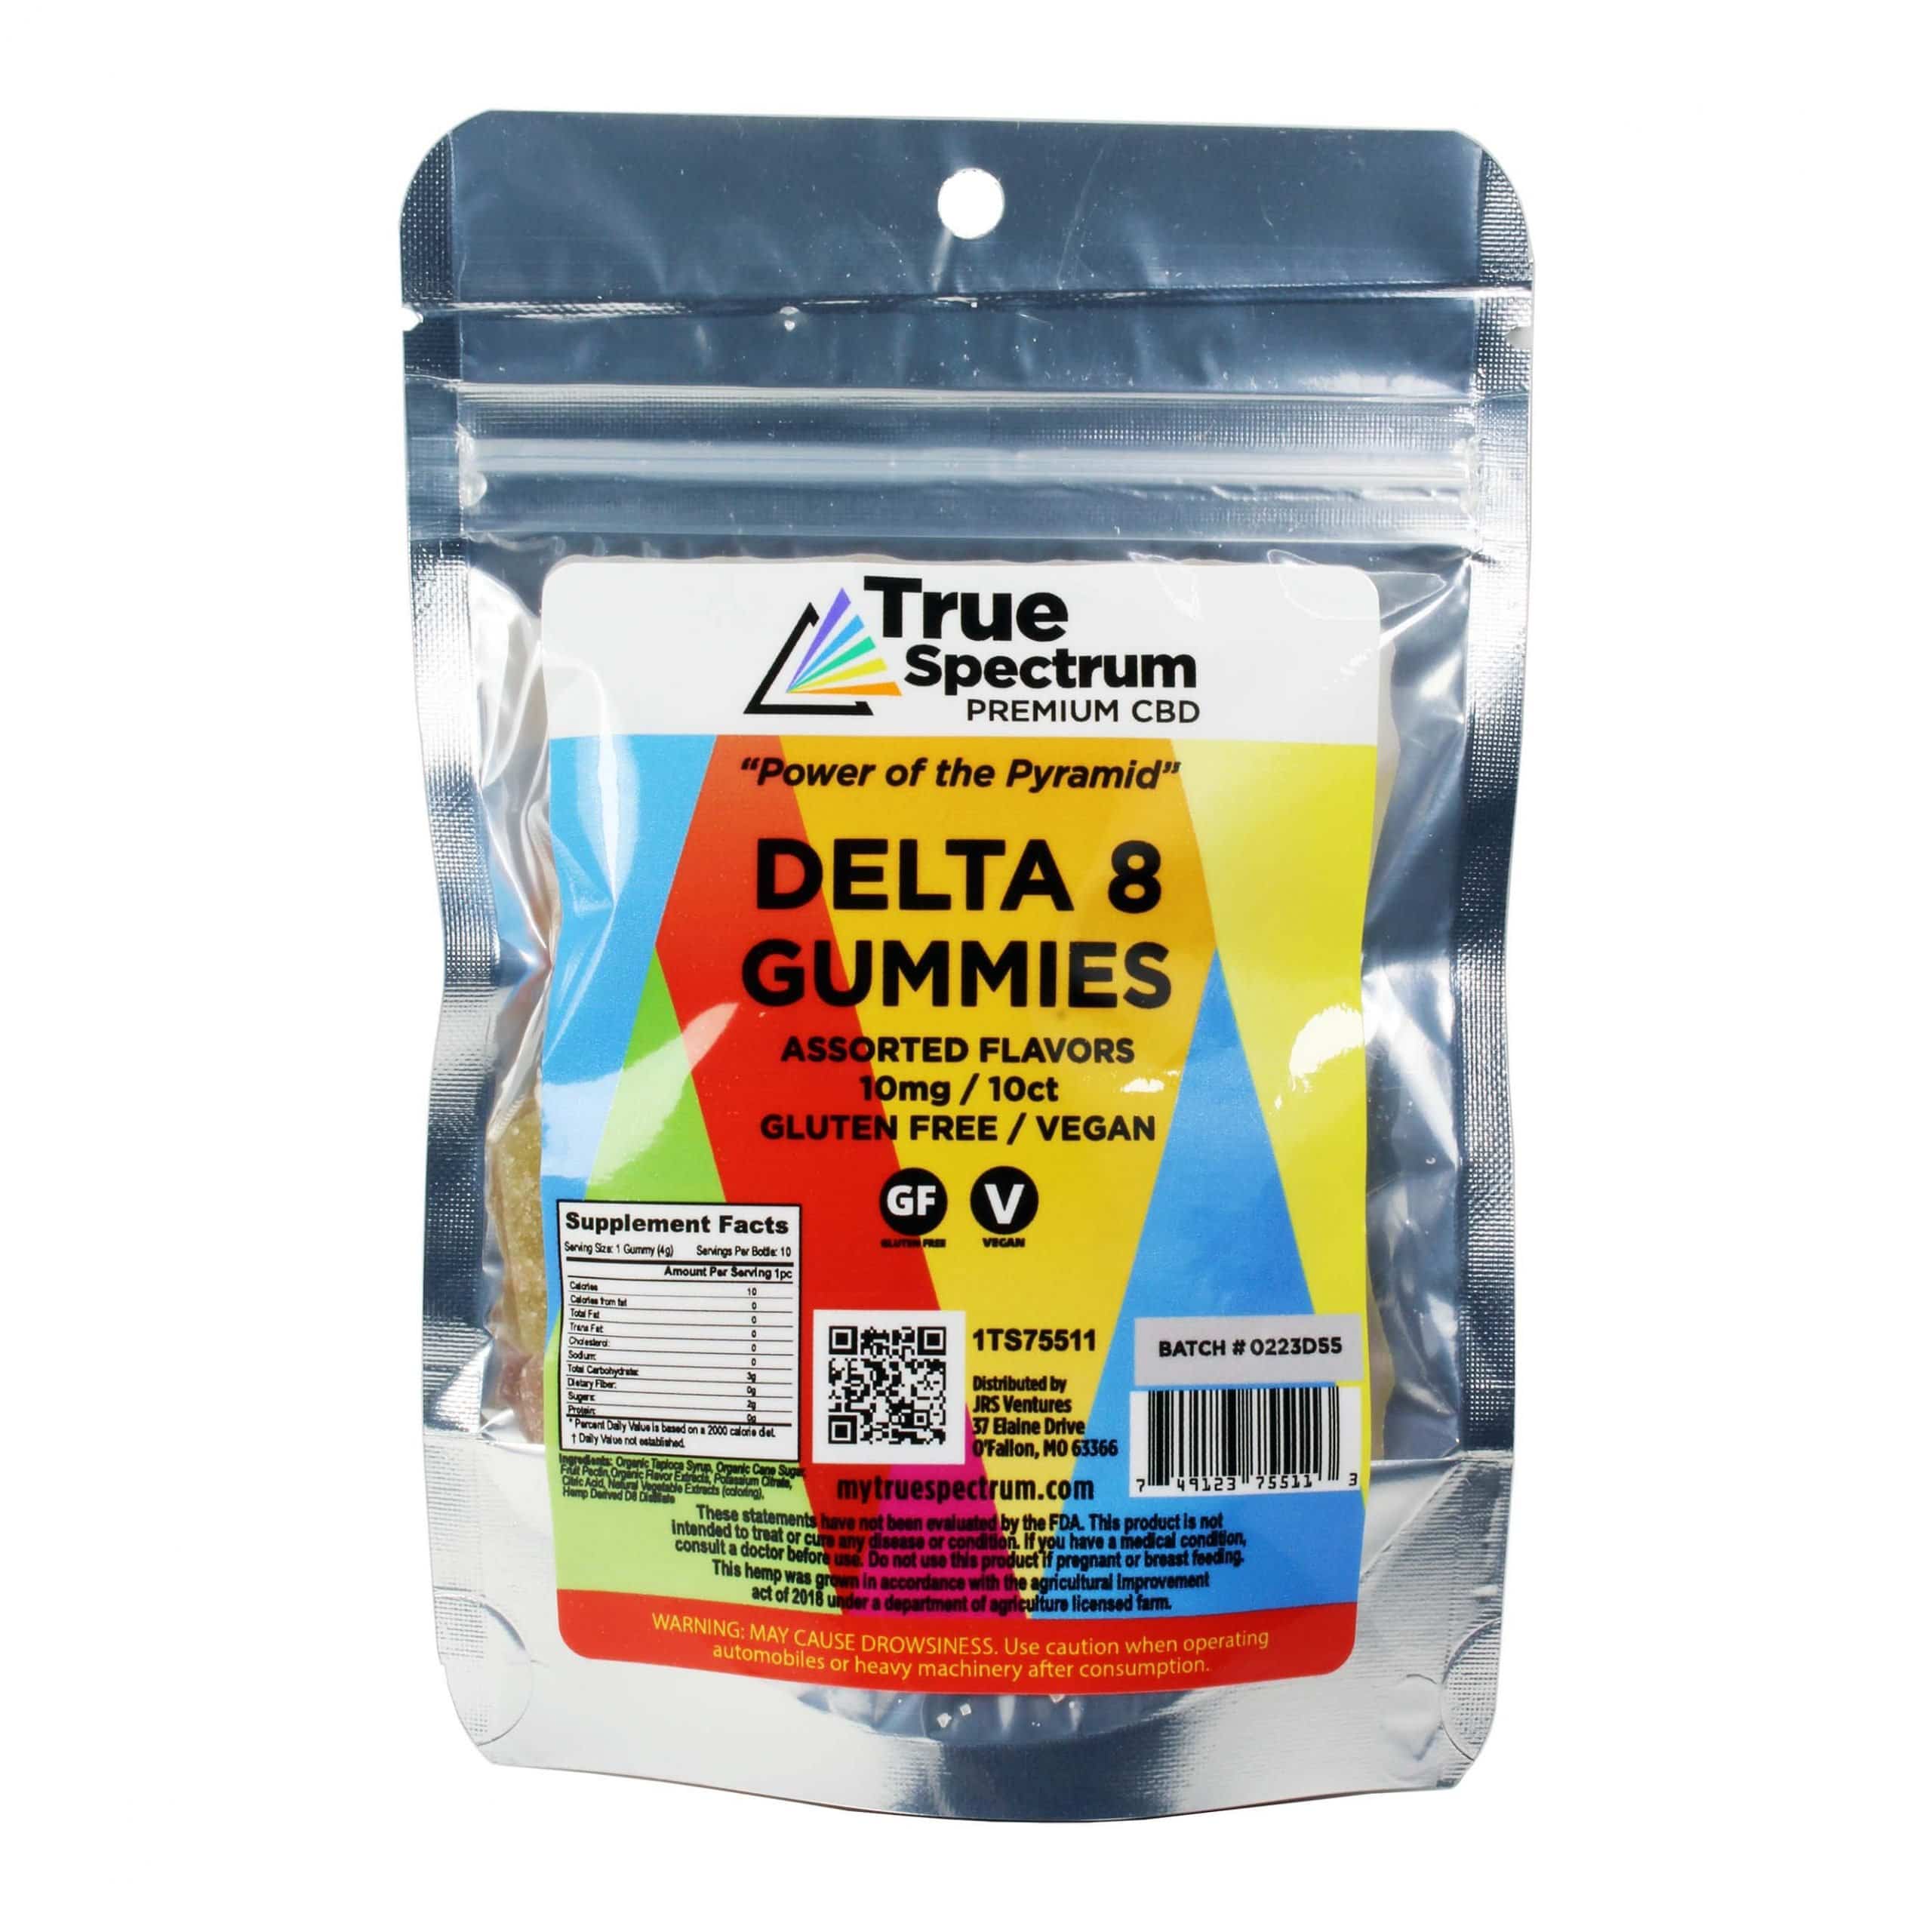 DELTA-8 By My True Spectrum-The Ultimate Delta-8 Experience A Comprehensive and In-Depth Review